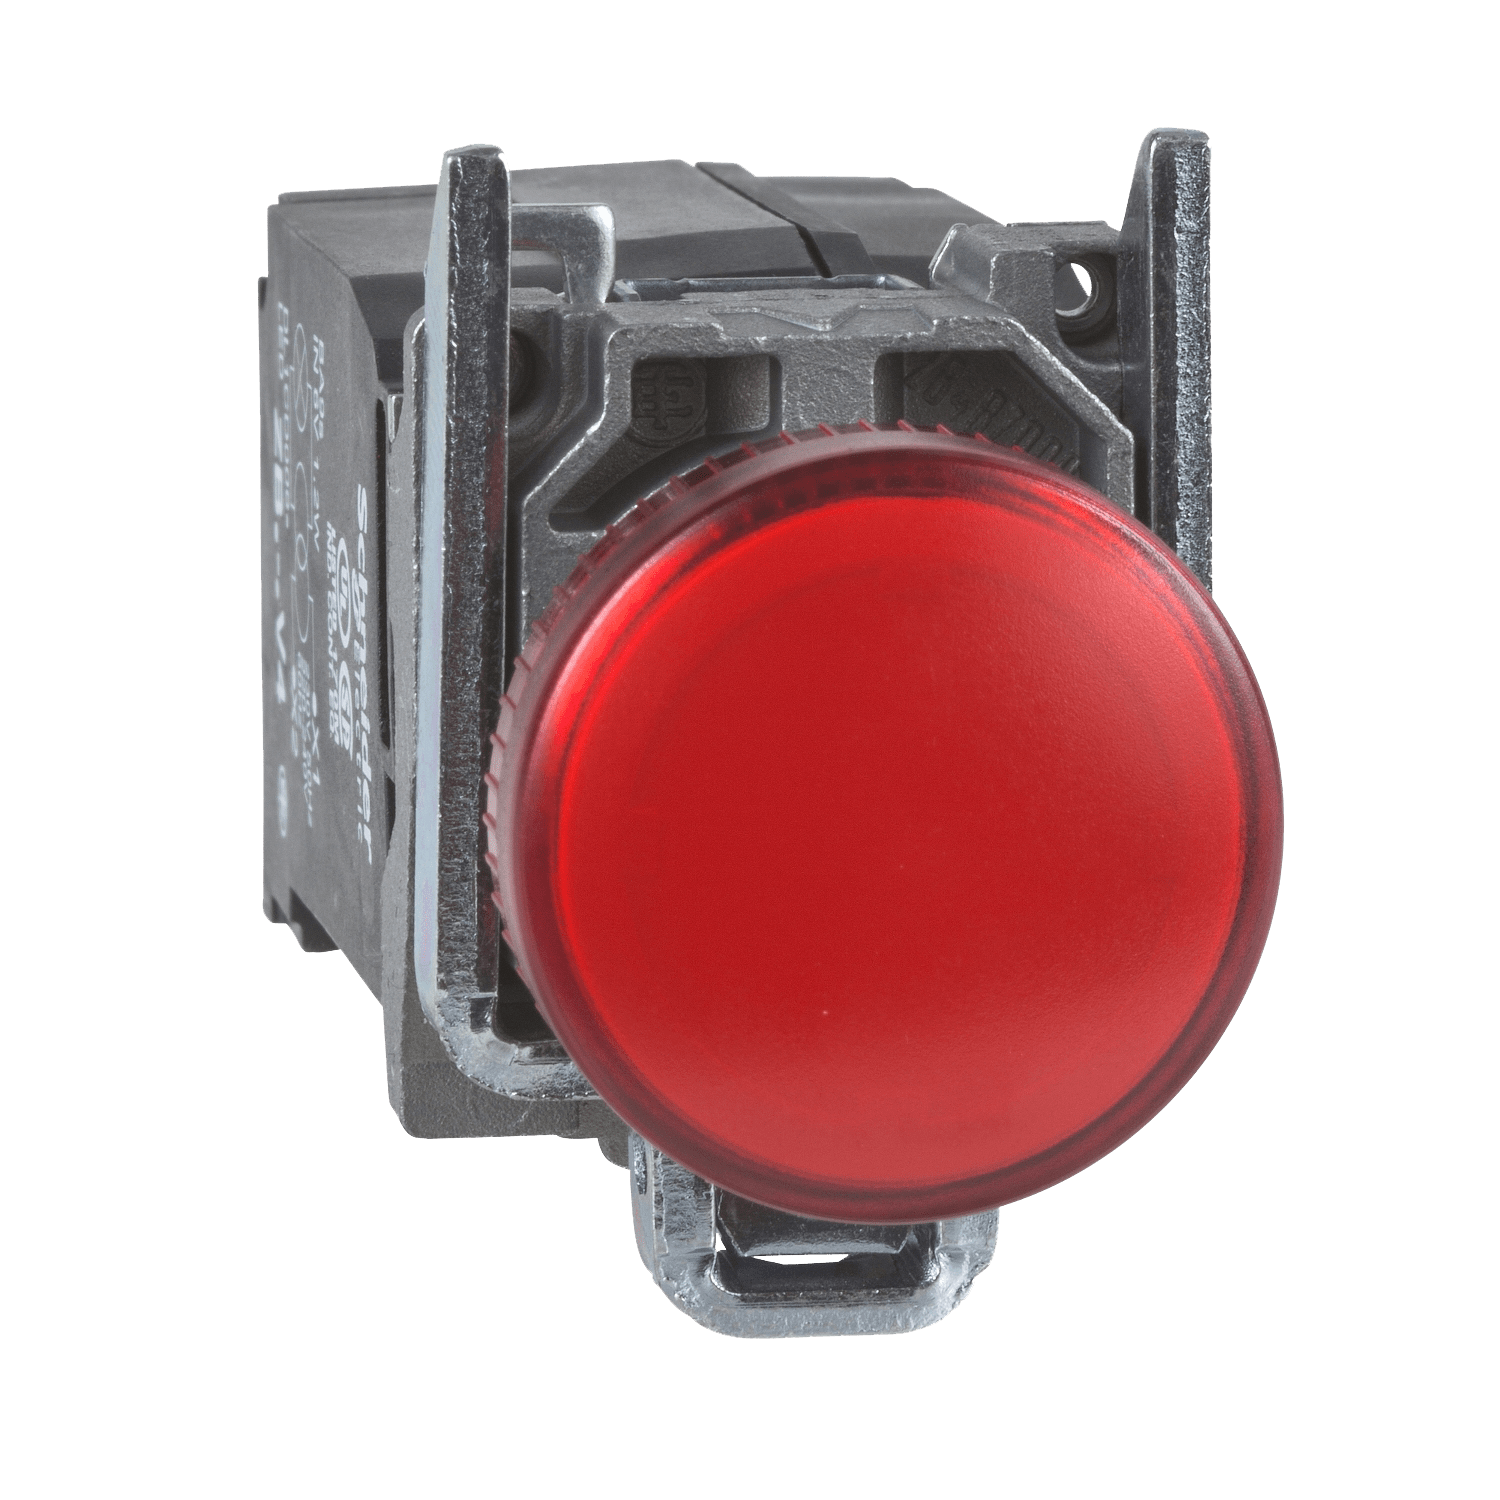 Harmony 22mm Pushbutton by Schneider Electric